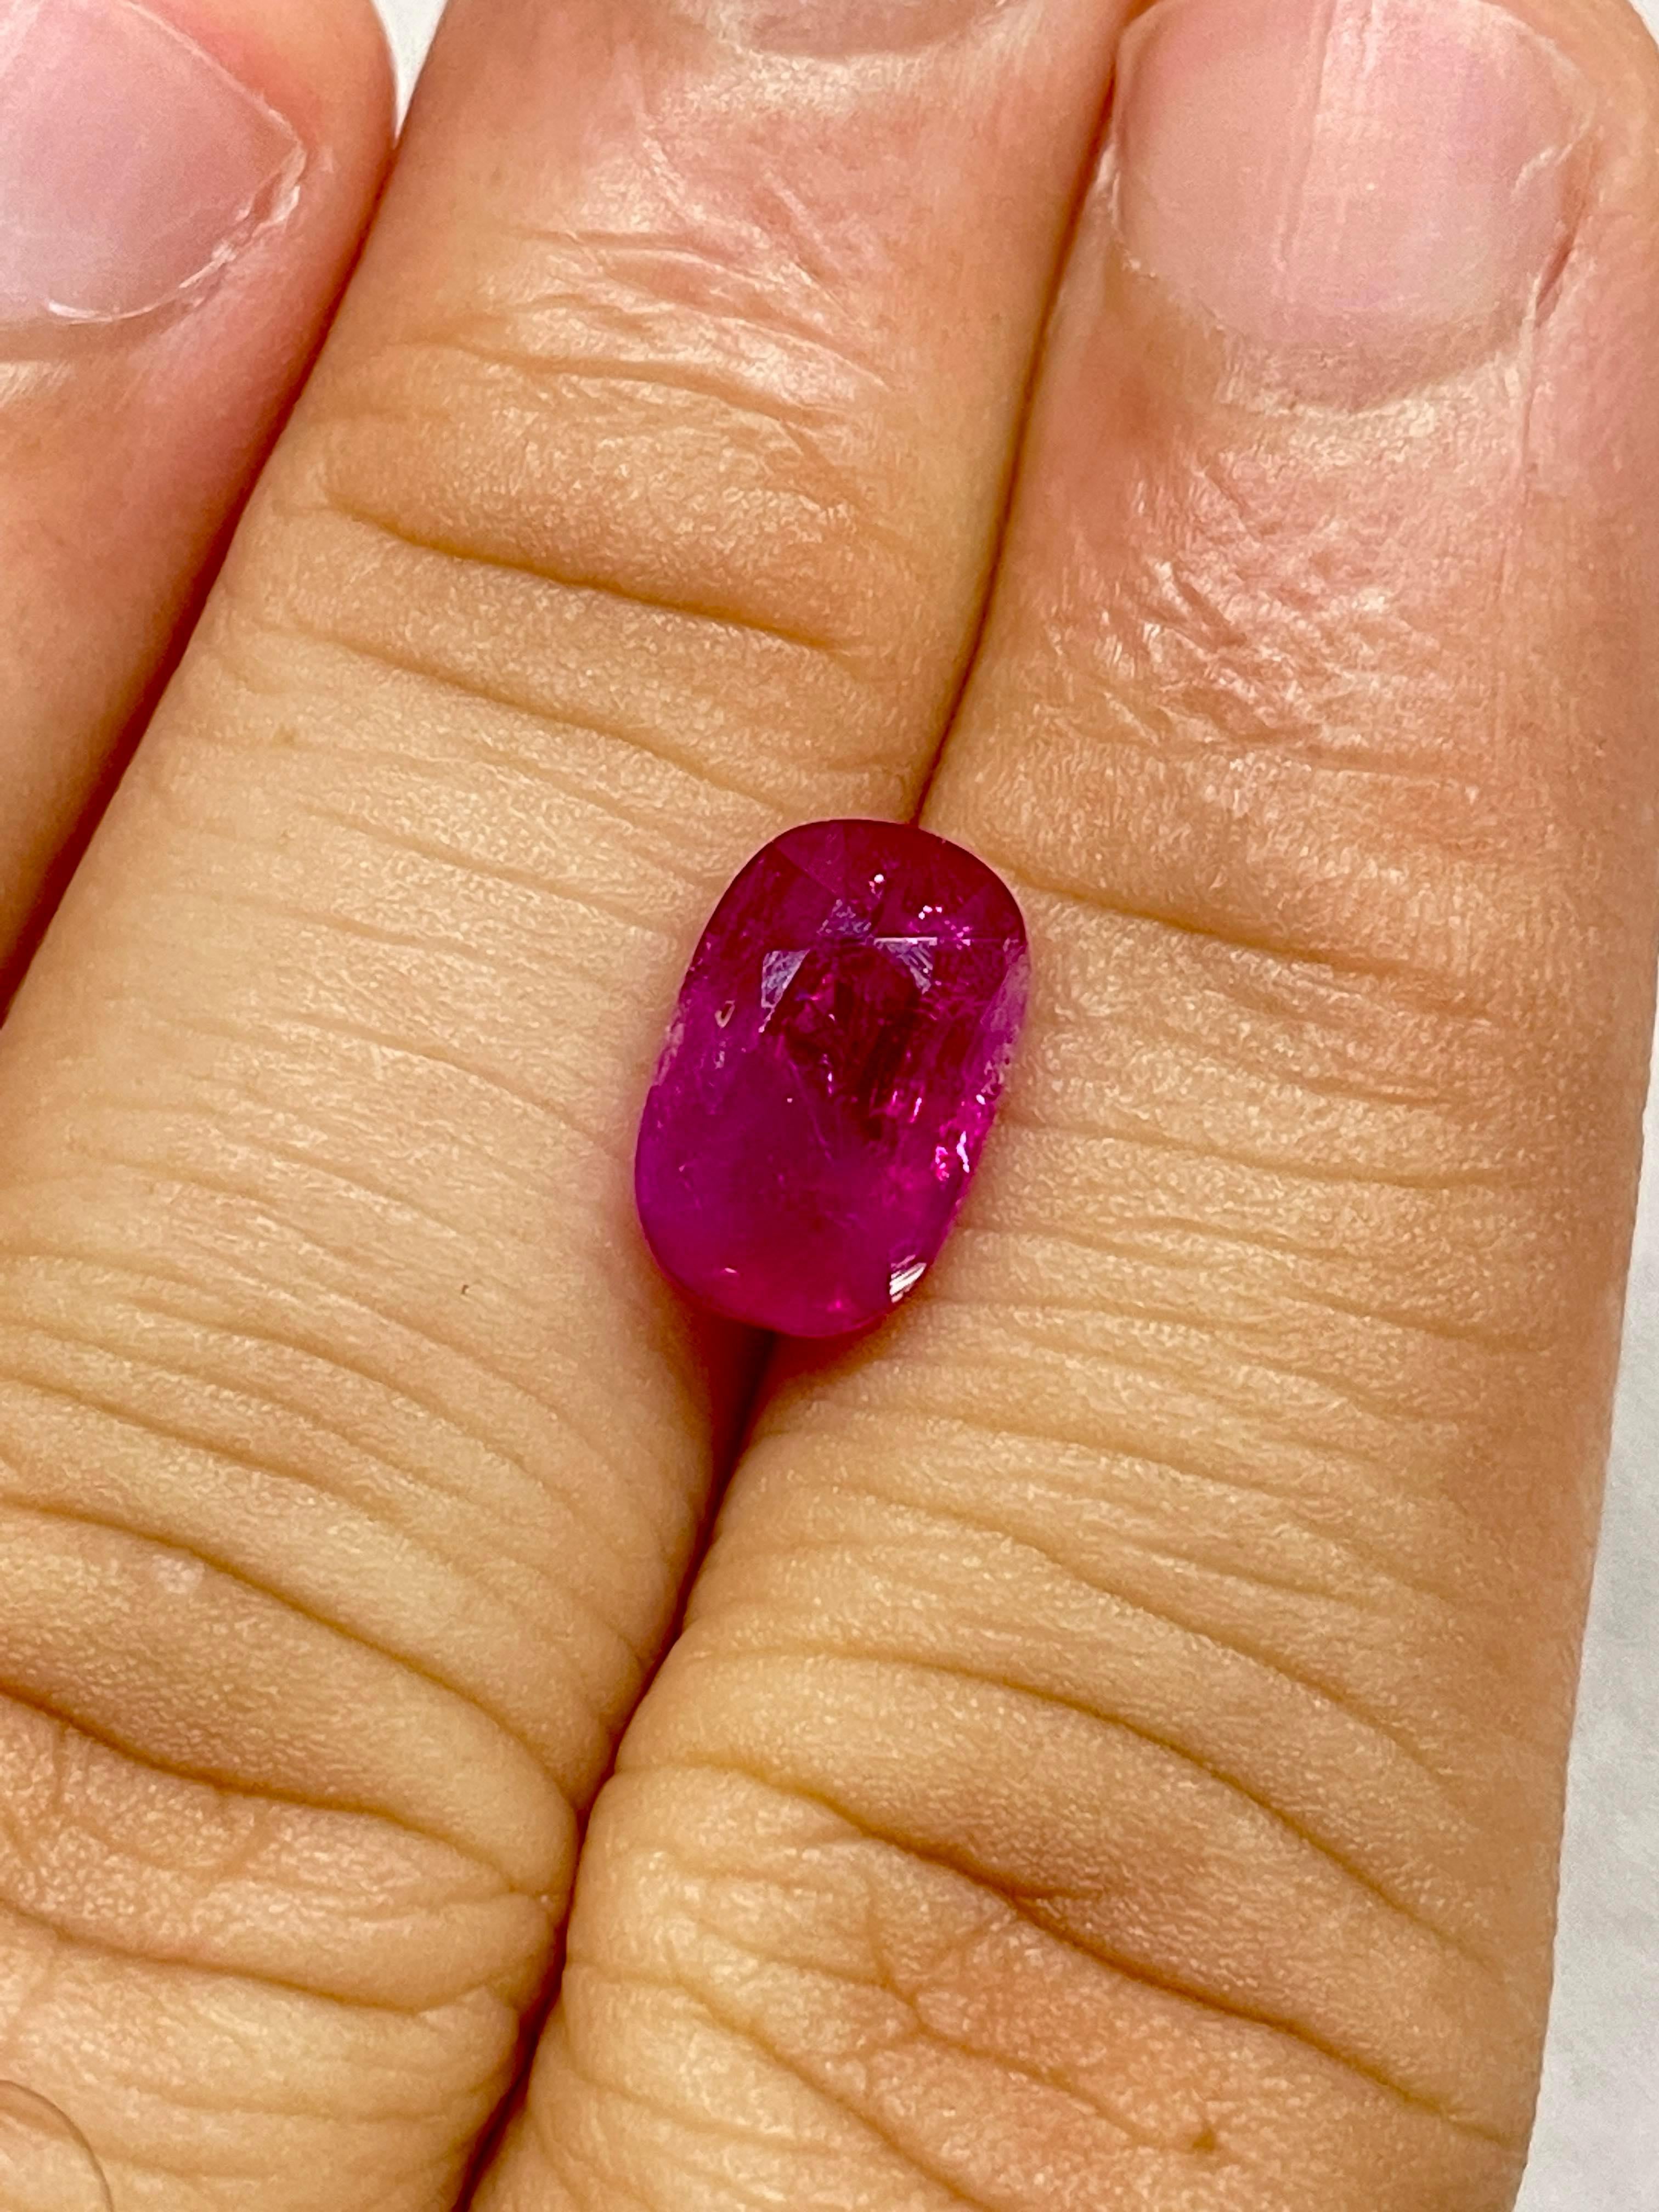 Burma ruby, or Burmese ruby, is the finest sort of gem-quality rubies that you can find anywhere in the world1 . They contain the purest shade of red, otherwise known as “pigeon blood” or “blood-red”1 .
Burma ruby came from the Mogok Valley in Upper